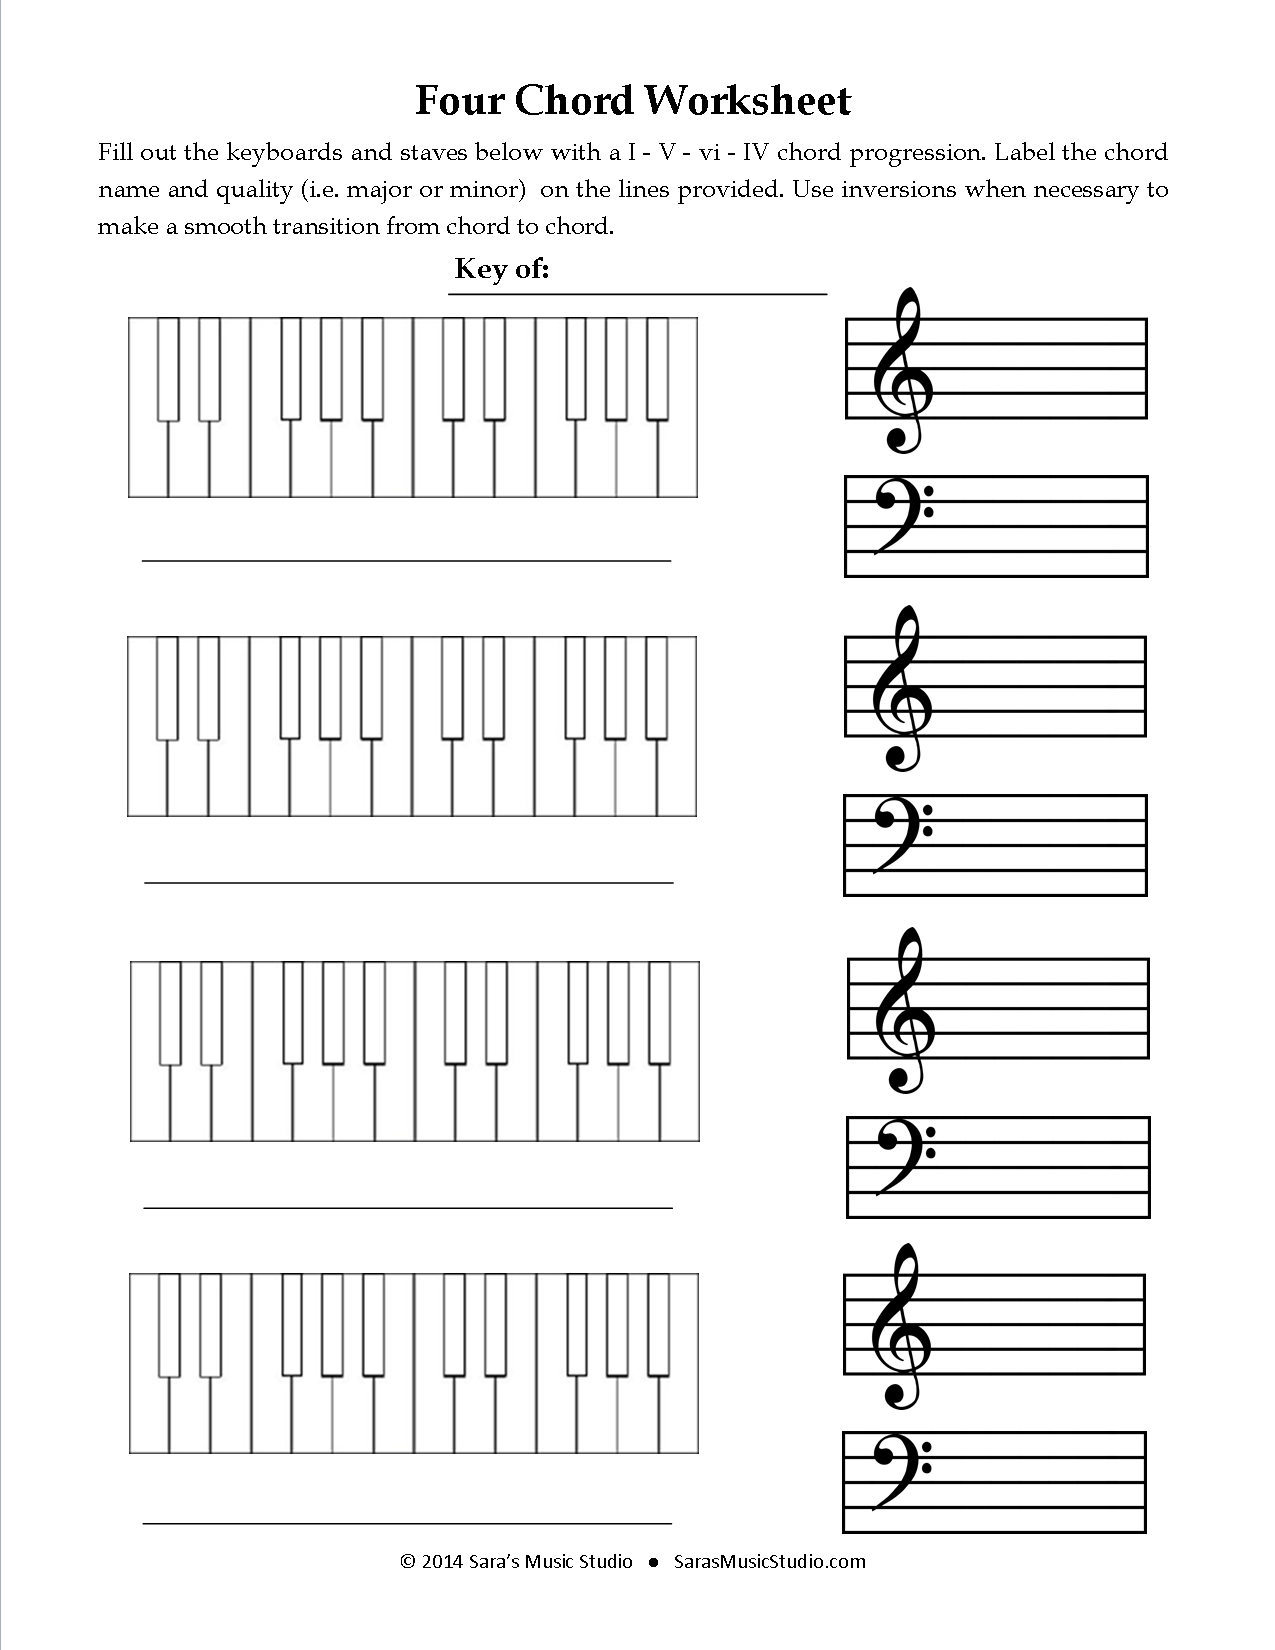 Axis Of Awesome 4 Chords Four Chord Song Worksheet Saras Music Studio